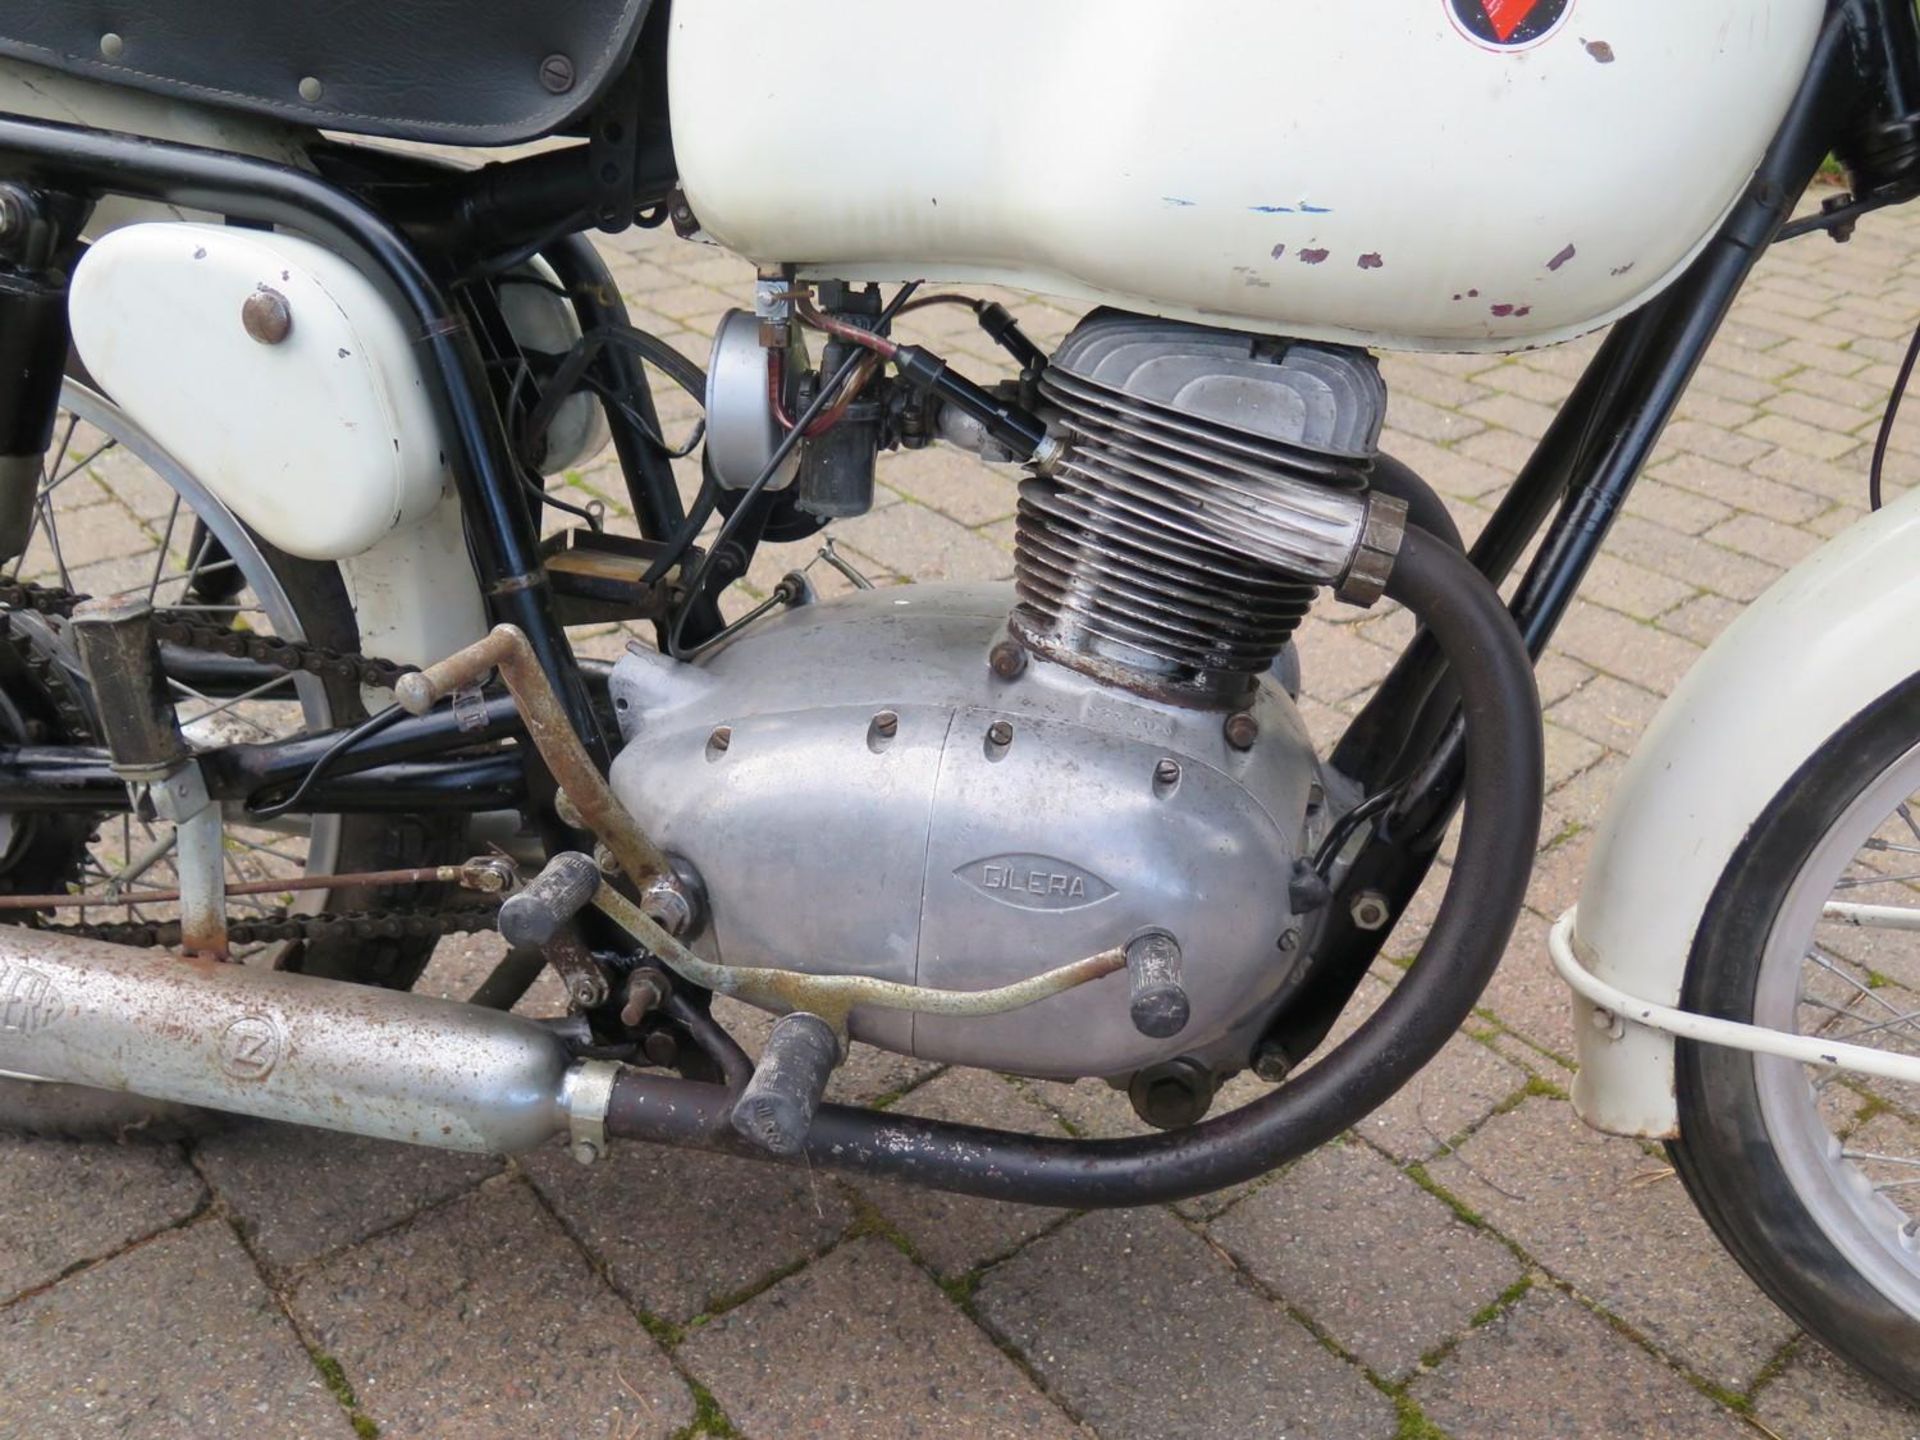 A 1957 Gilera 250 twin Frame number 23?918 Engine number 23?918 Original unrestored condition Not - Image 2 of 7